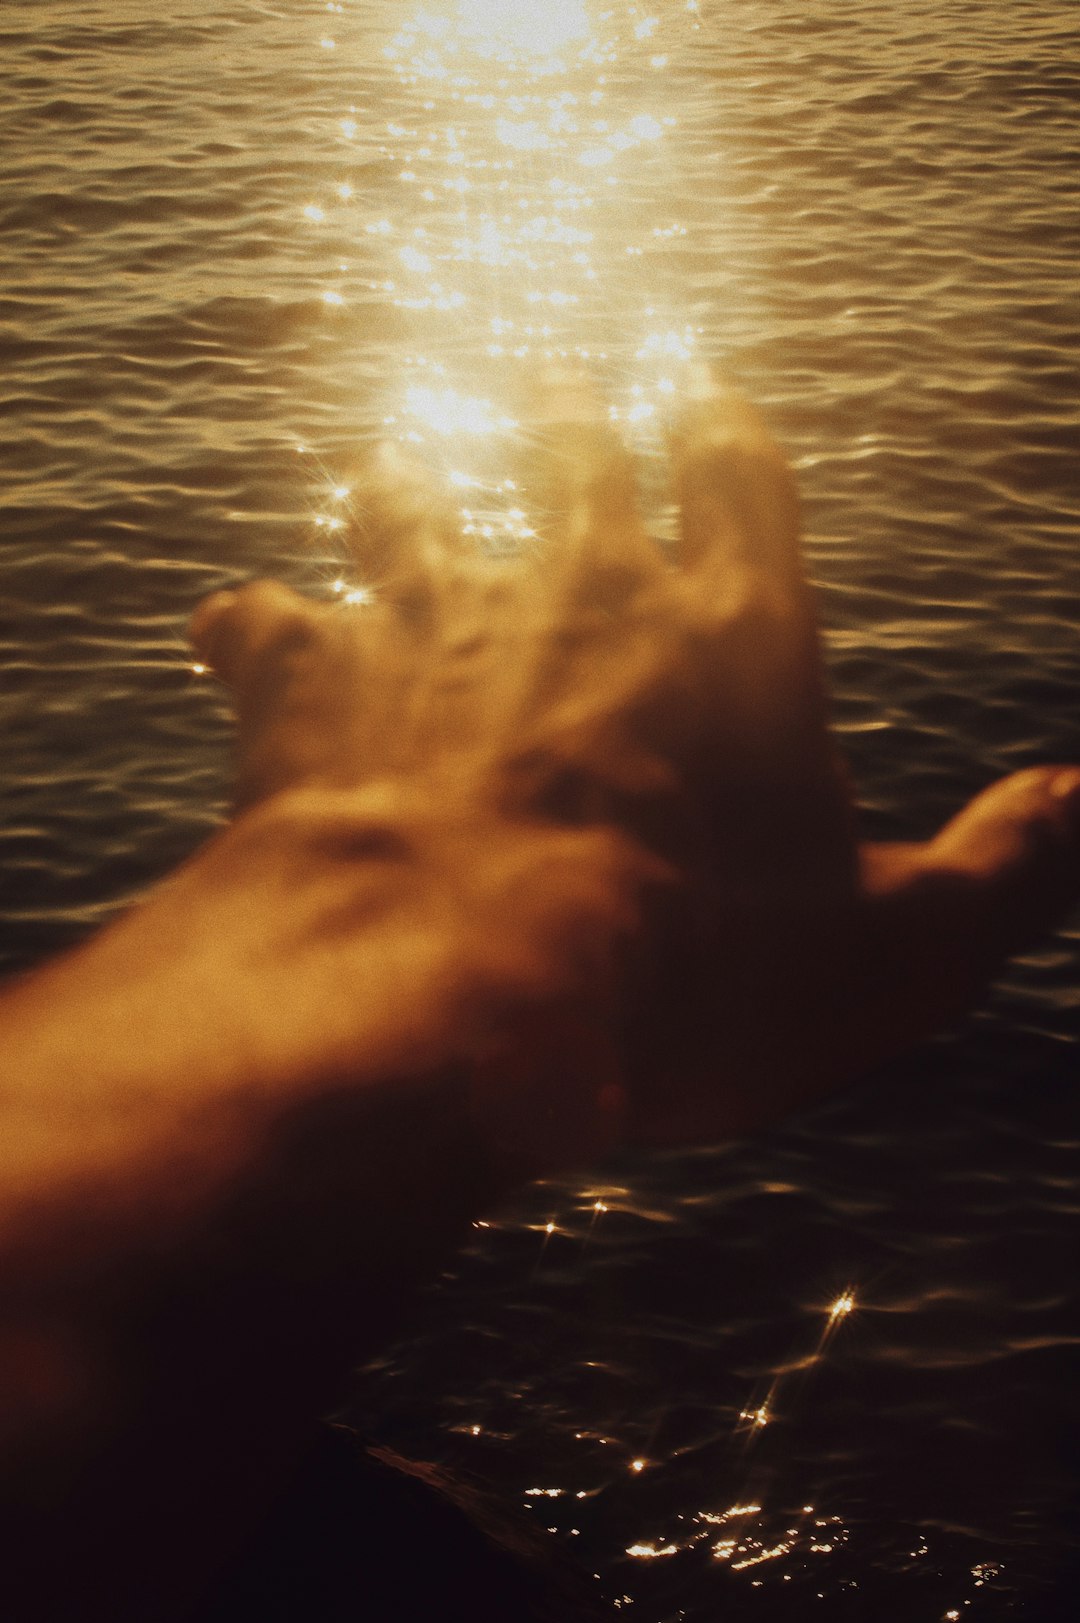 person holding a light in body of water during daytime